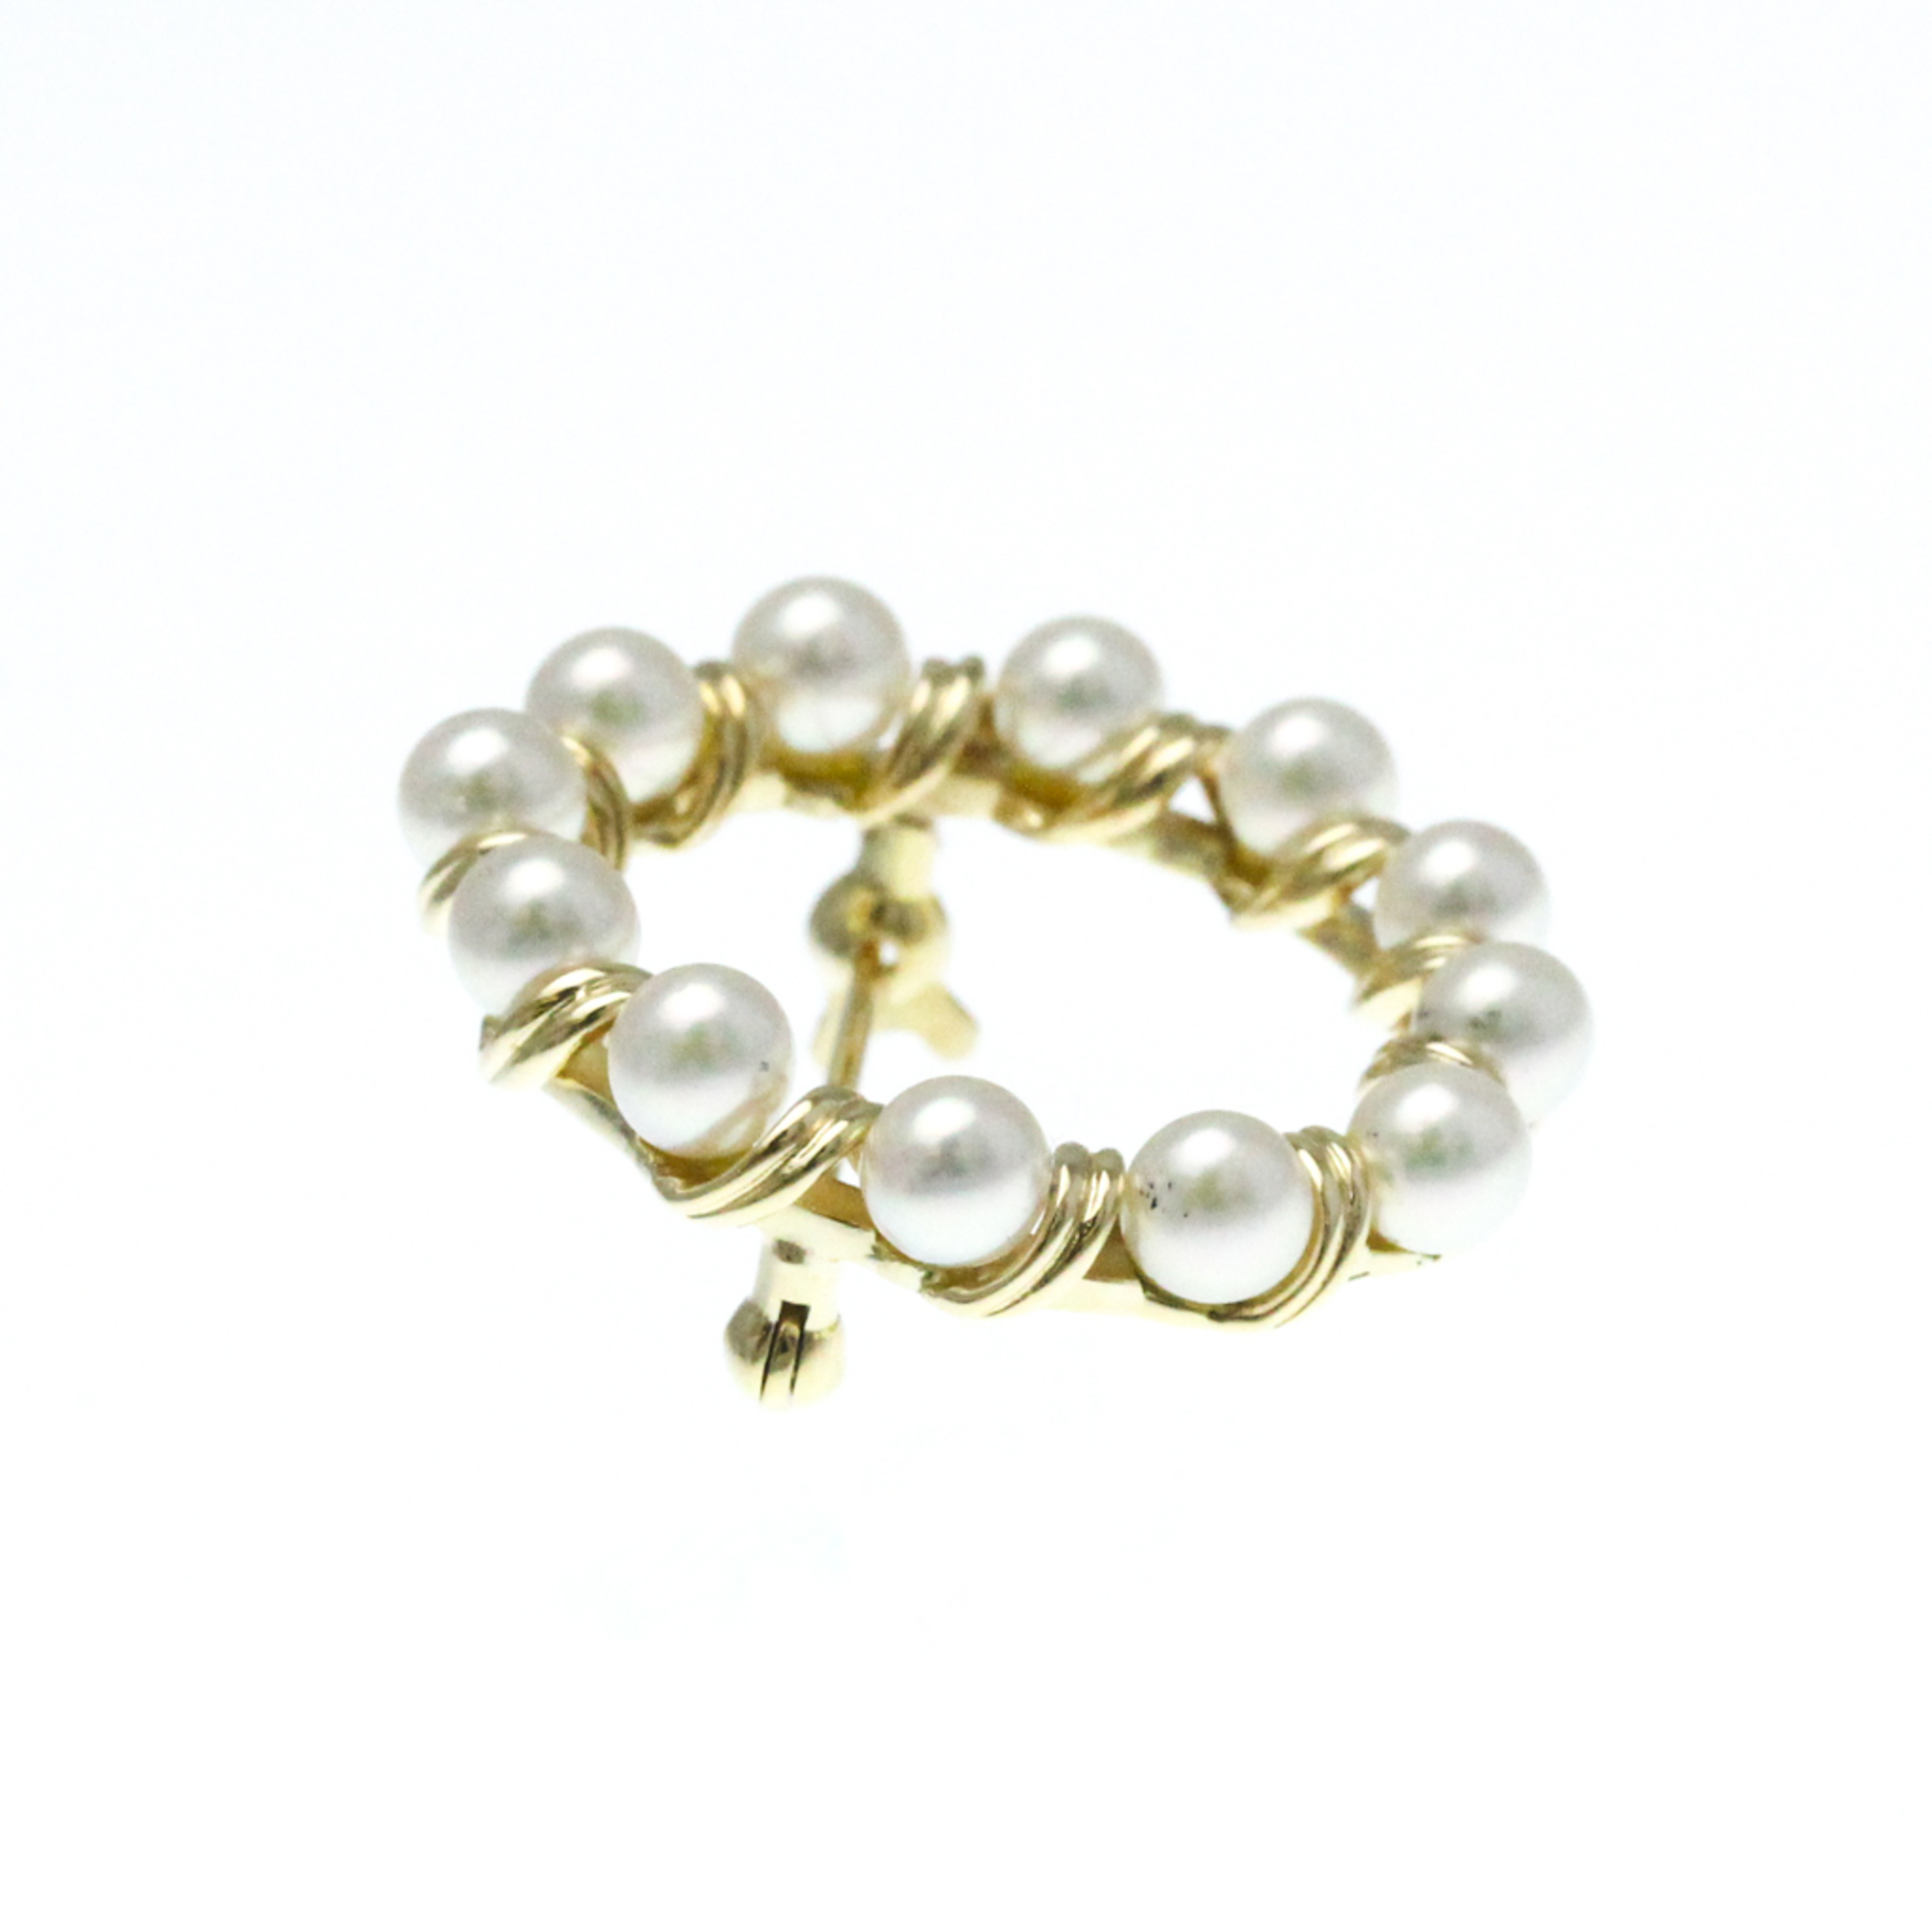 Mikimoto Pearl Brooch Yellow Gold (14K) Pearl Brooch Gold,White